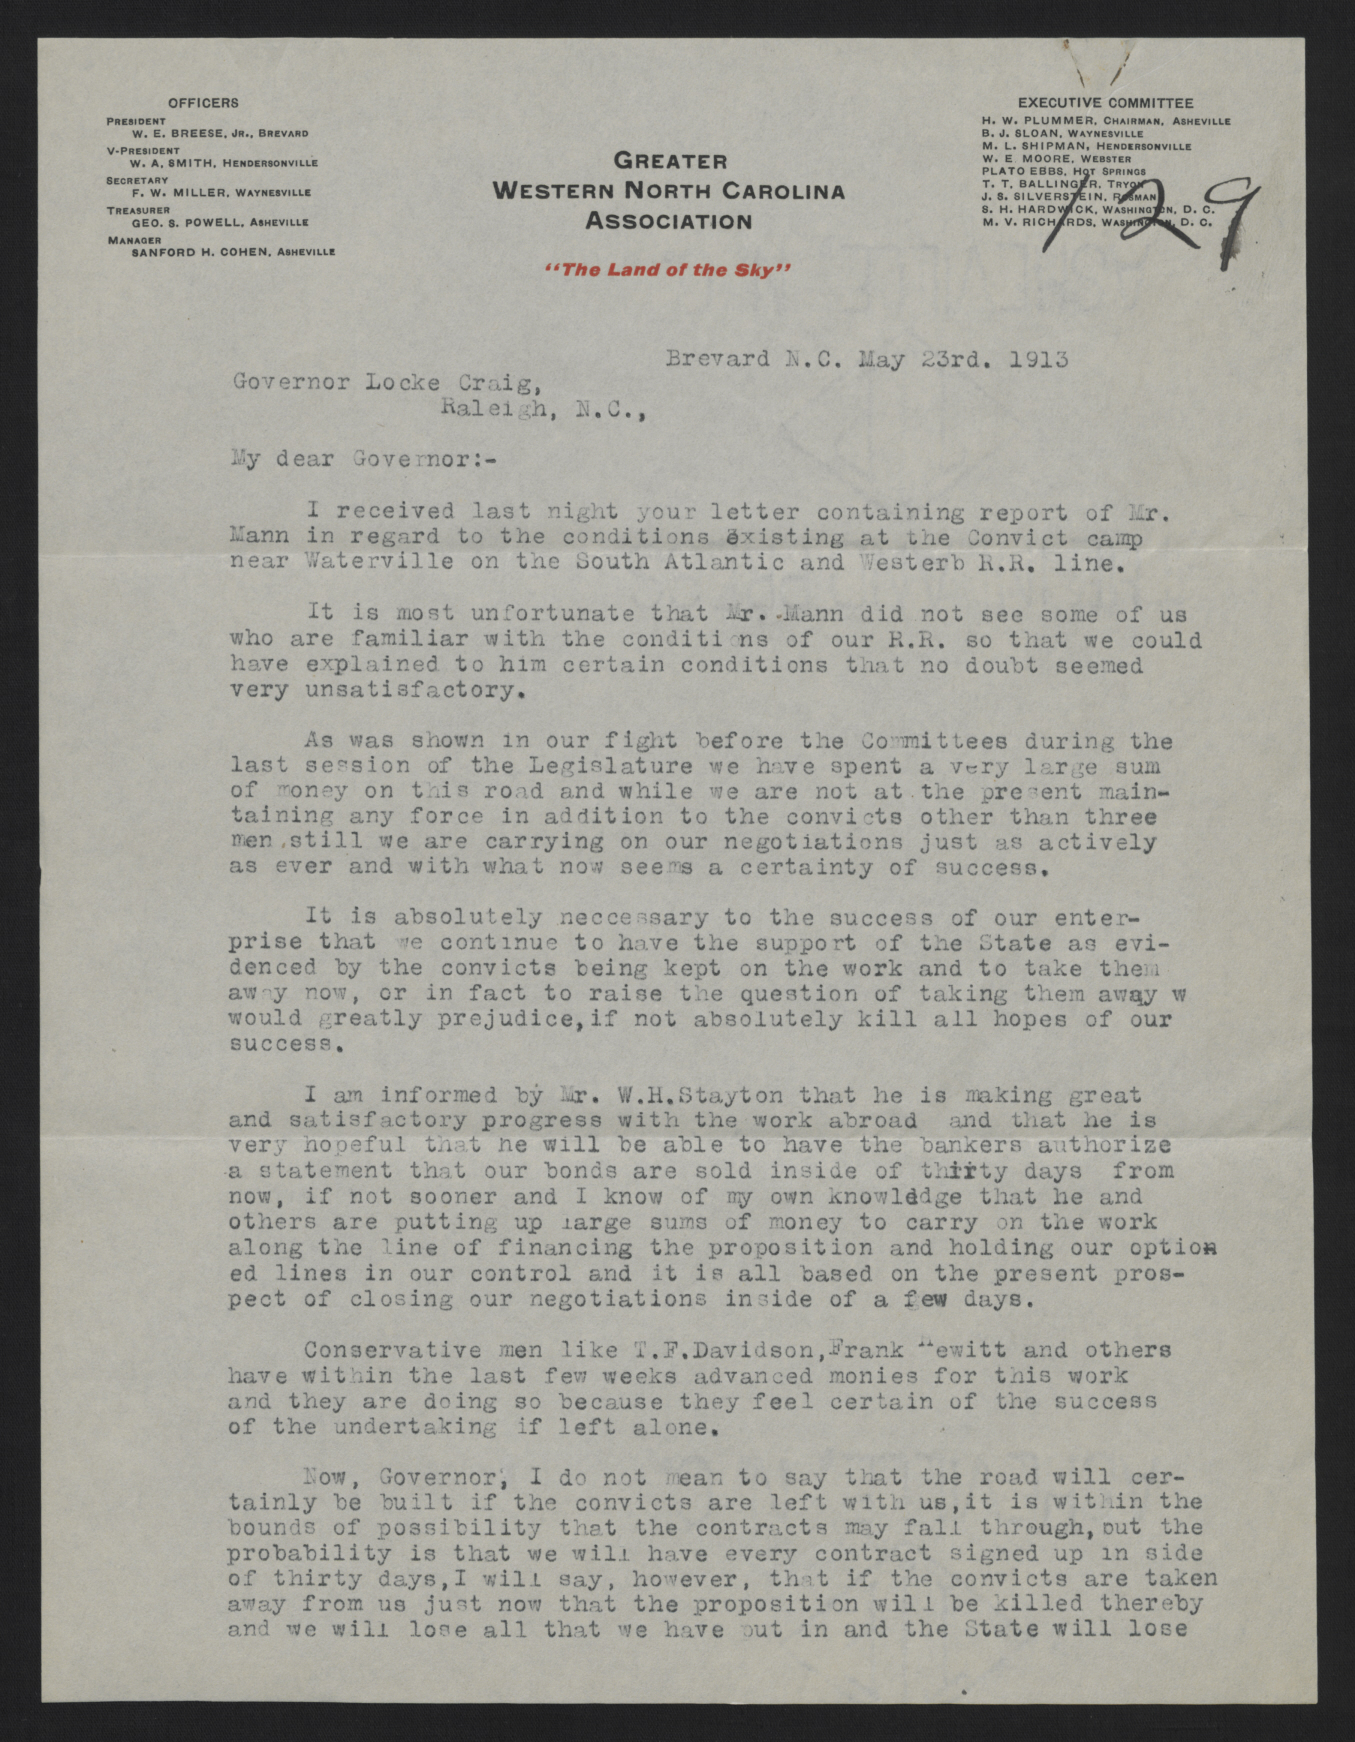 Letter from Breese to Craig, May 23, 1913, page 1